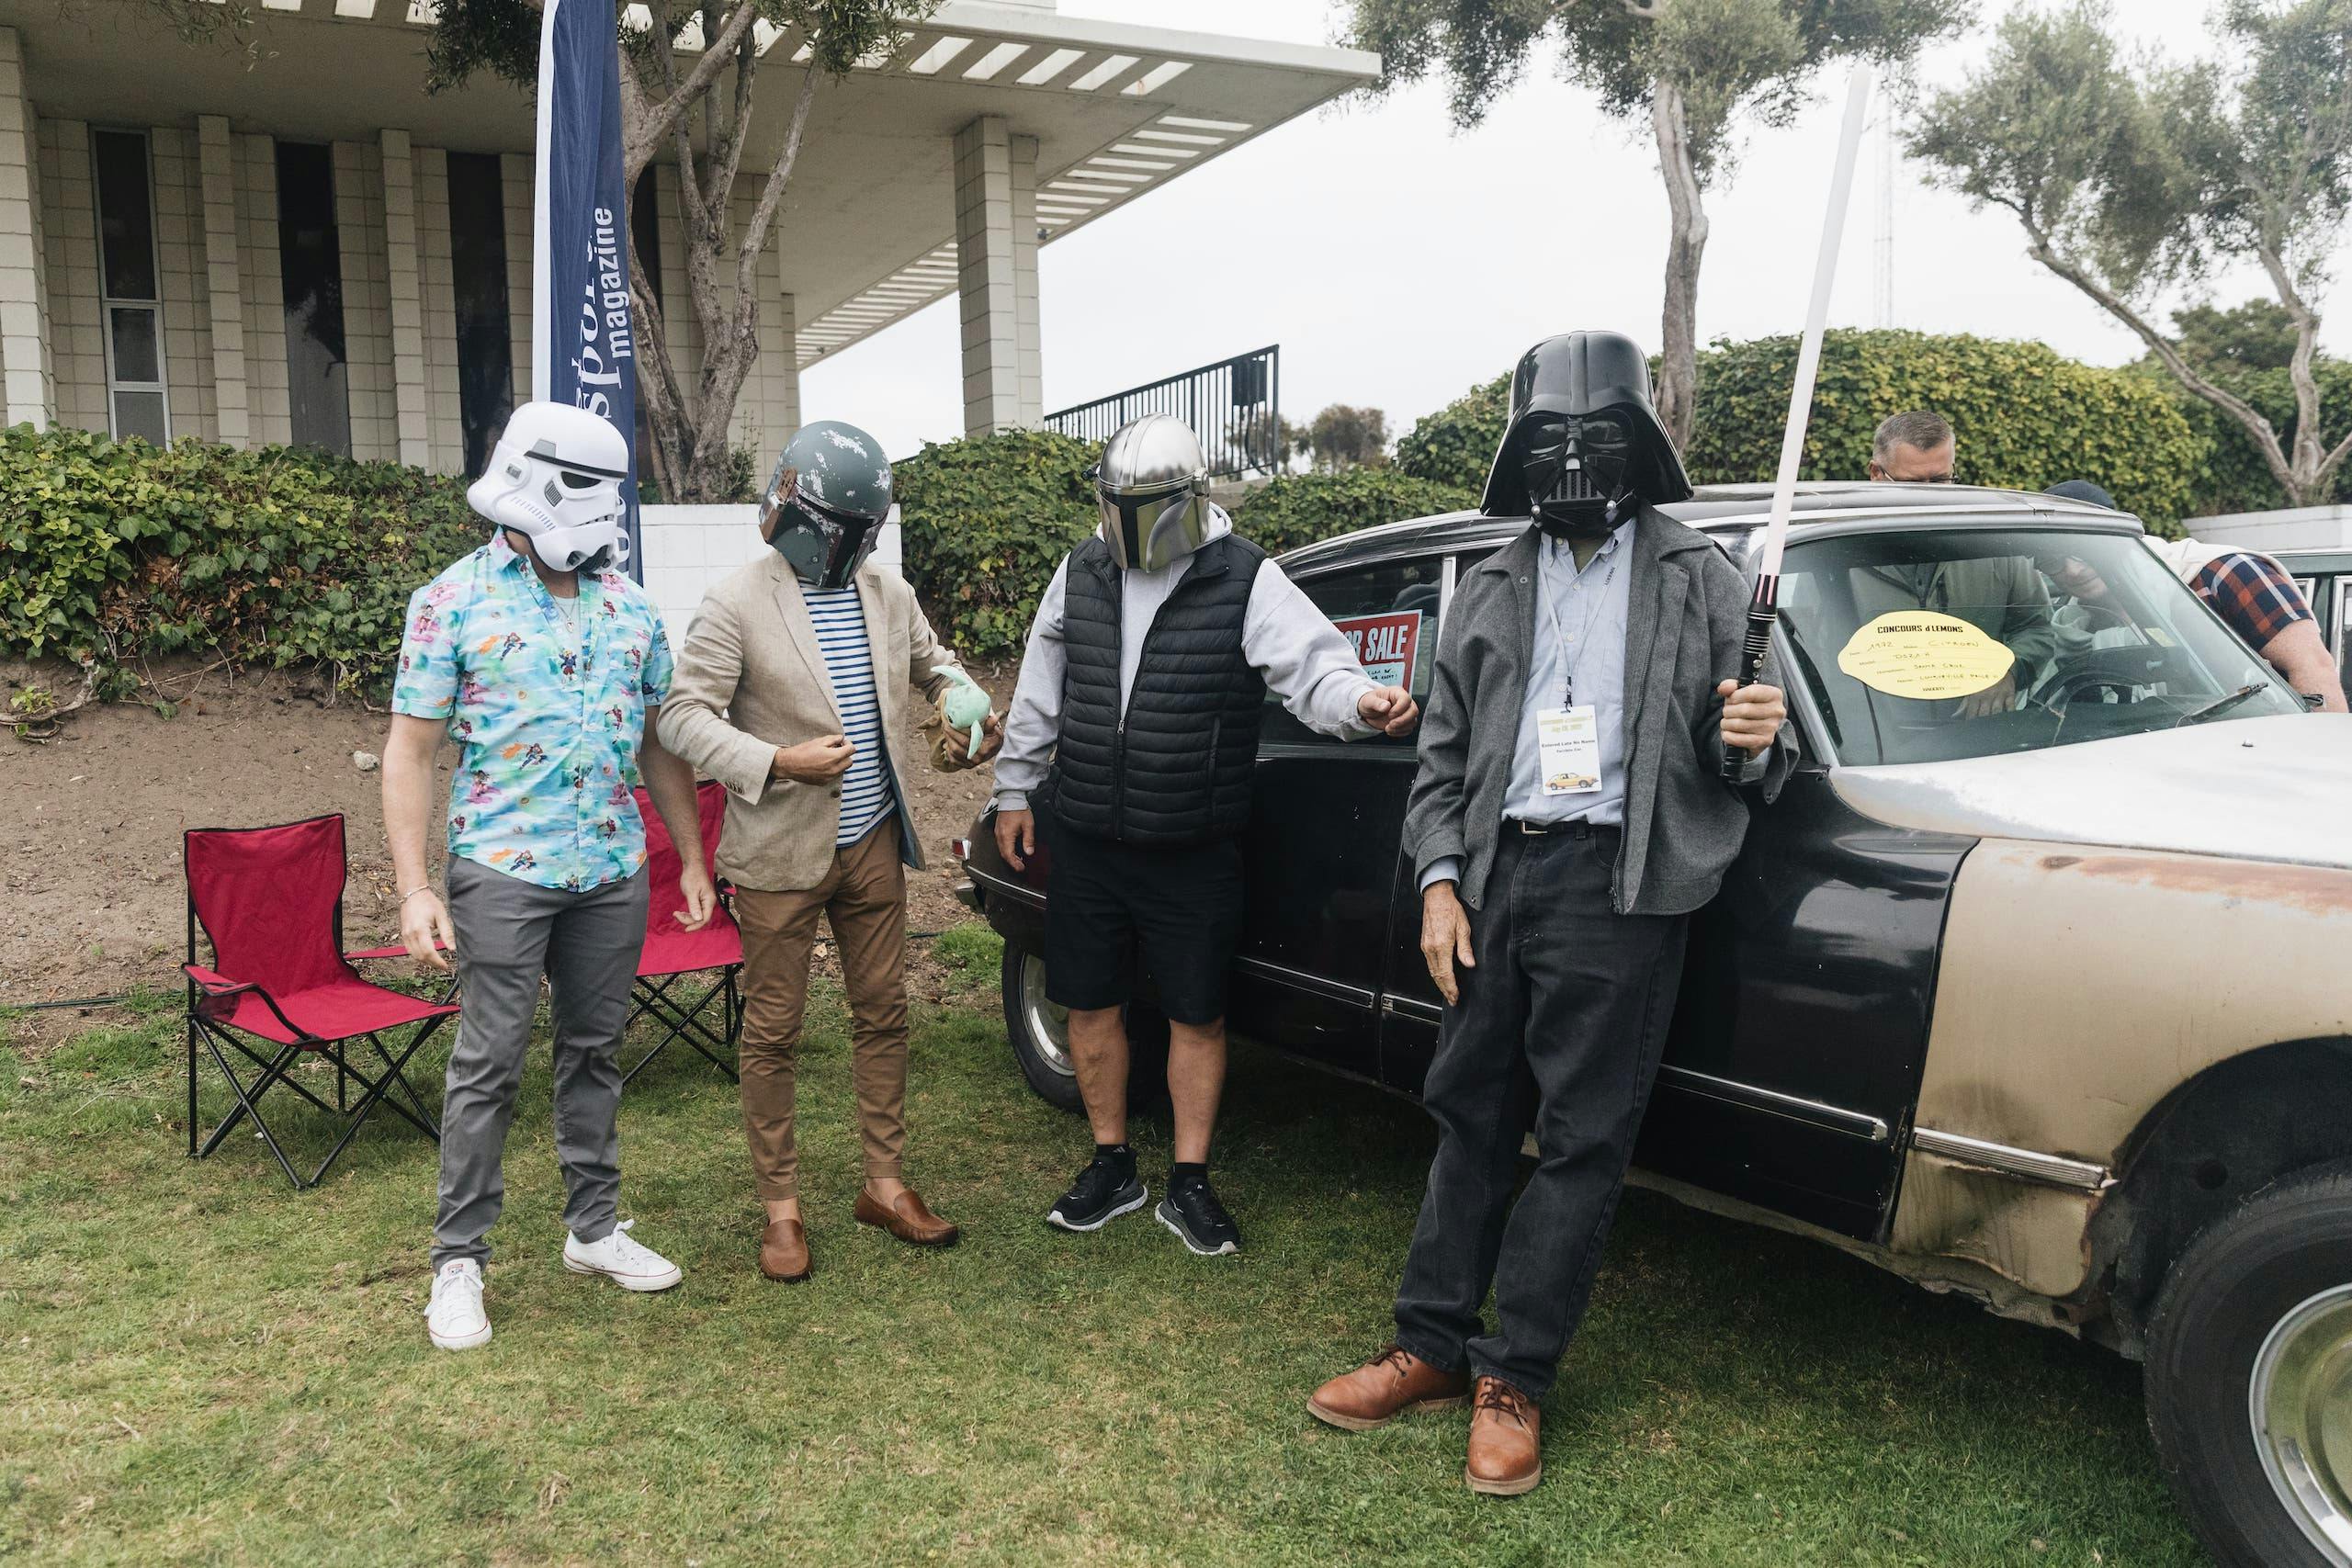 2022 Monterey Concours dLemons star wars